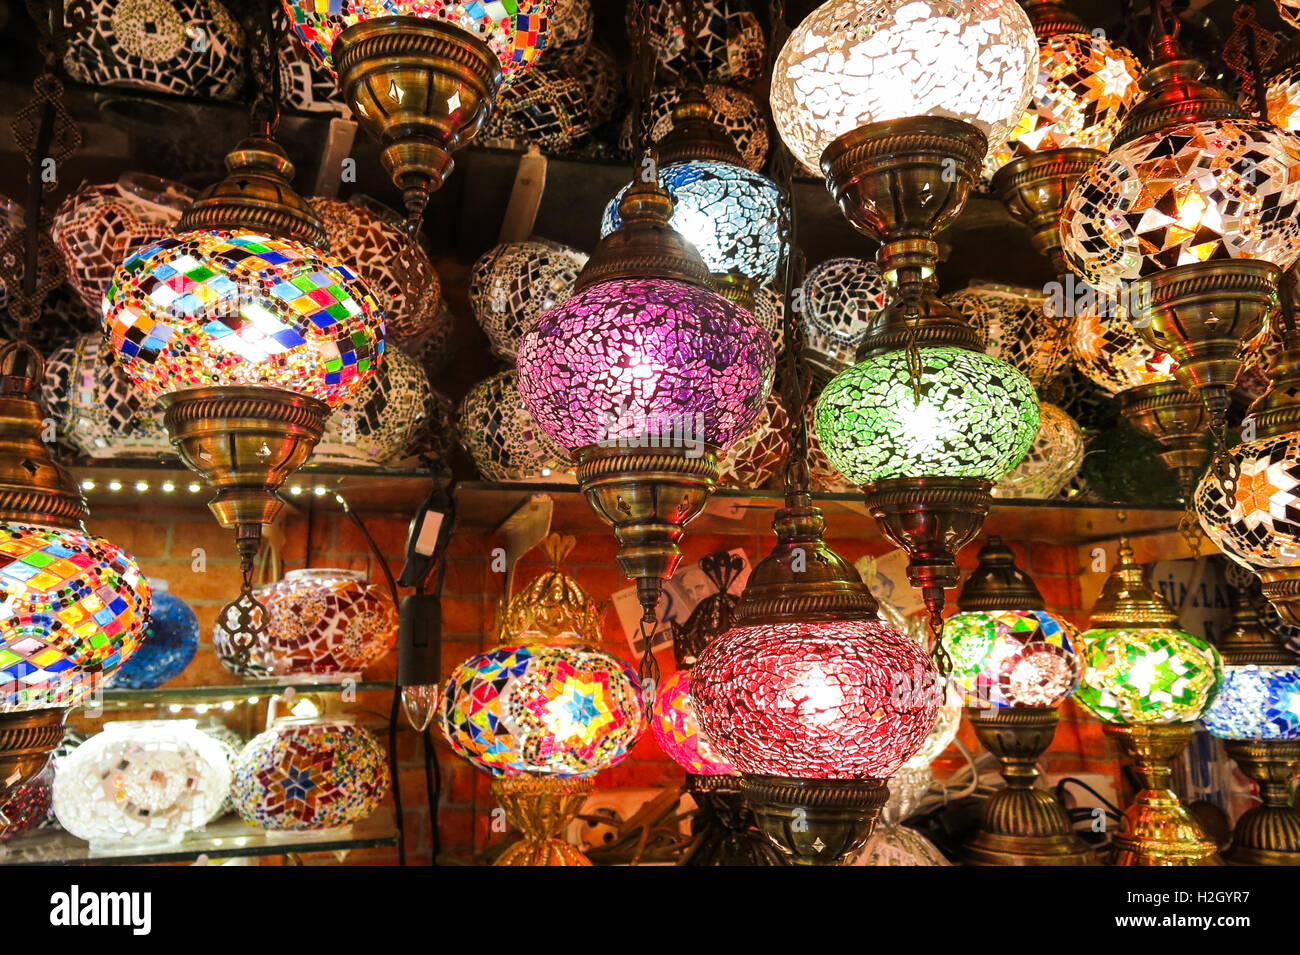 Colorful Turkish lamps in the Grand Bazaar of Istanbul, Turkey Stock Photo  - Alamy